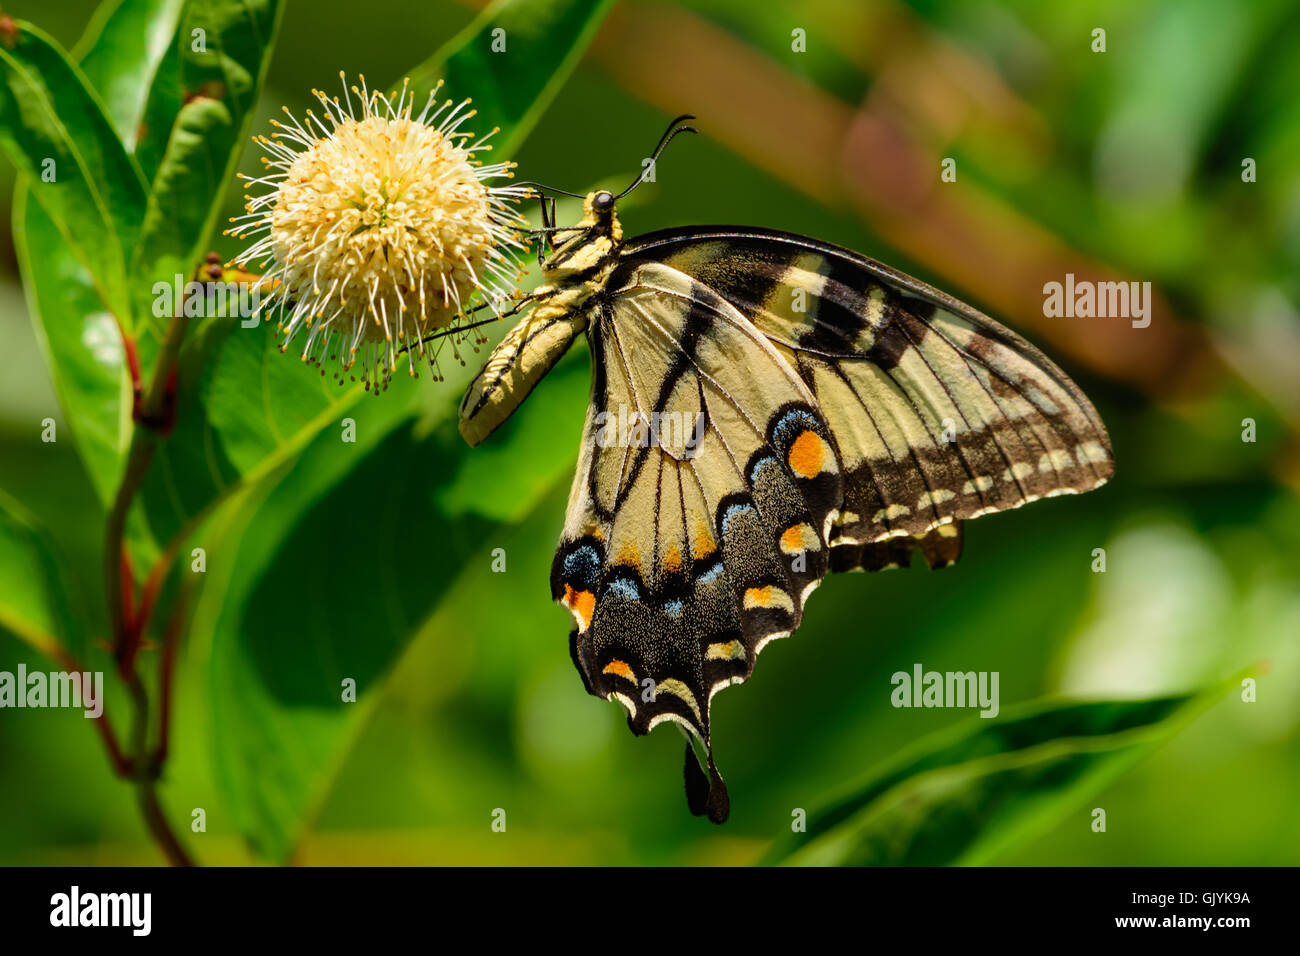 Eastern tiger swallowtail (Papilio glaucus) butterfly on flower. blurred green background side view Stock Photo